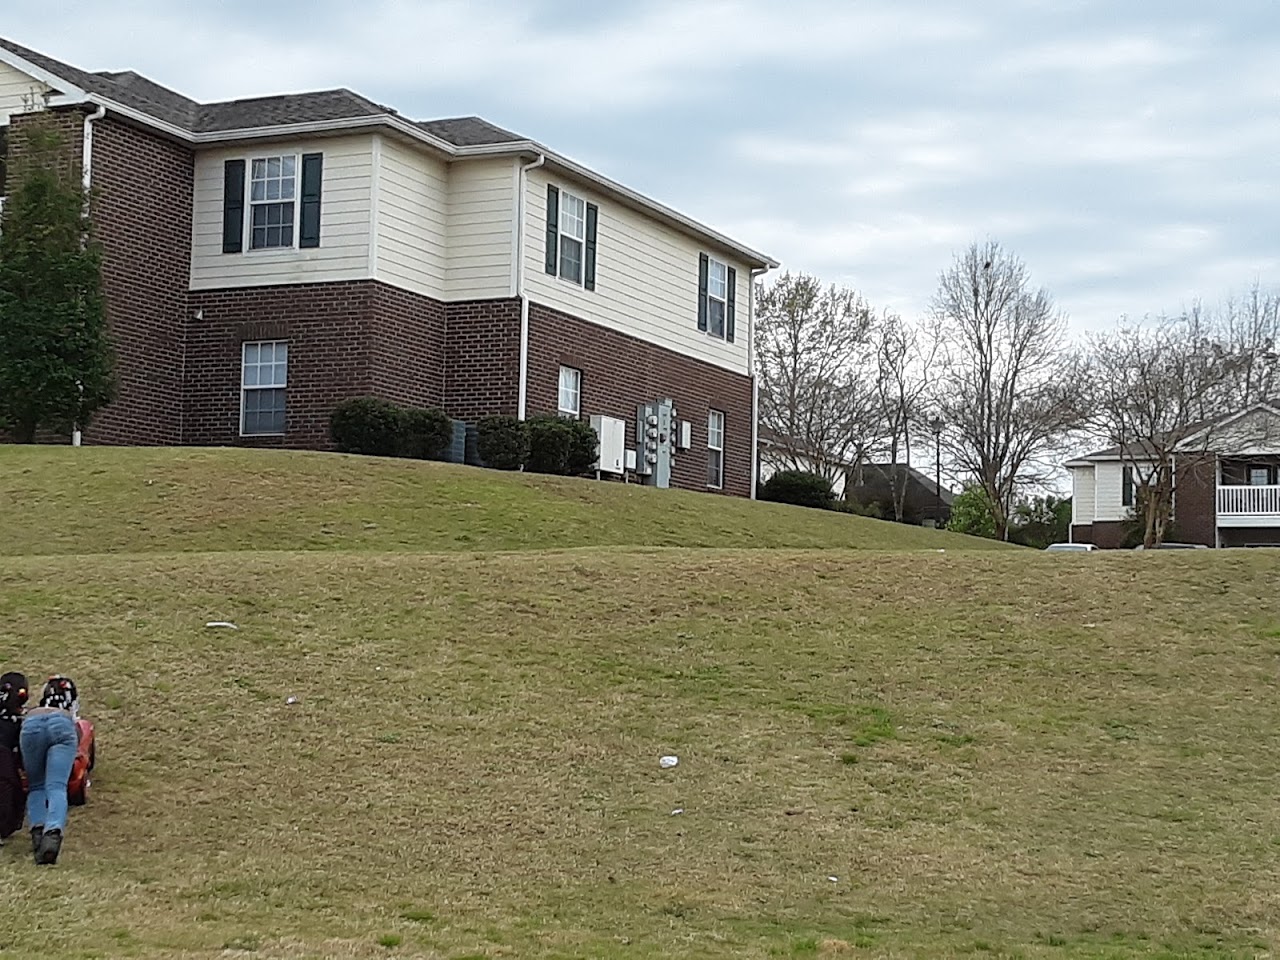 Photo of BRENTWOOD LANDING APTS I. Affordable housing located at 597 COVERED BRIDGE PKWY PRATTVILLE, AL 36066